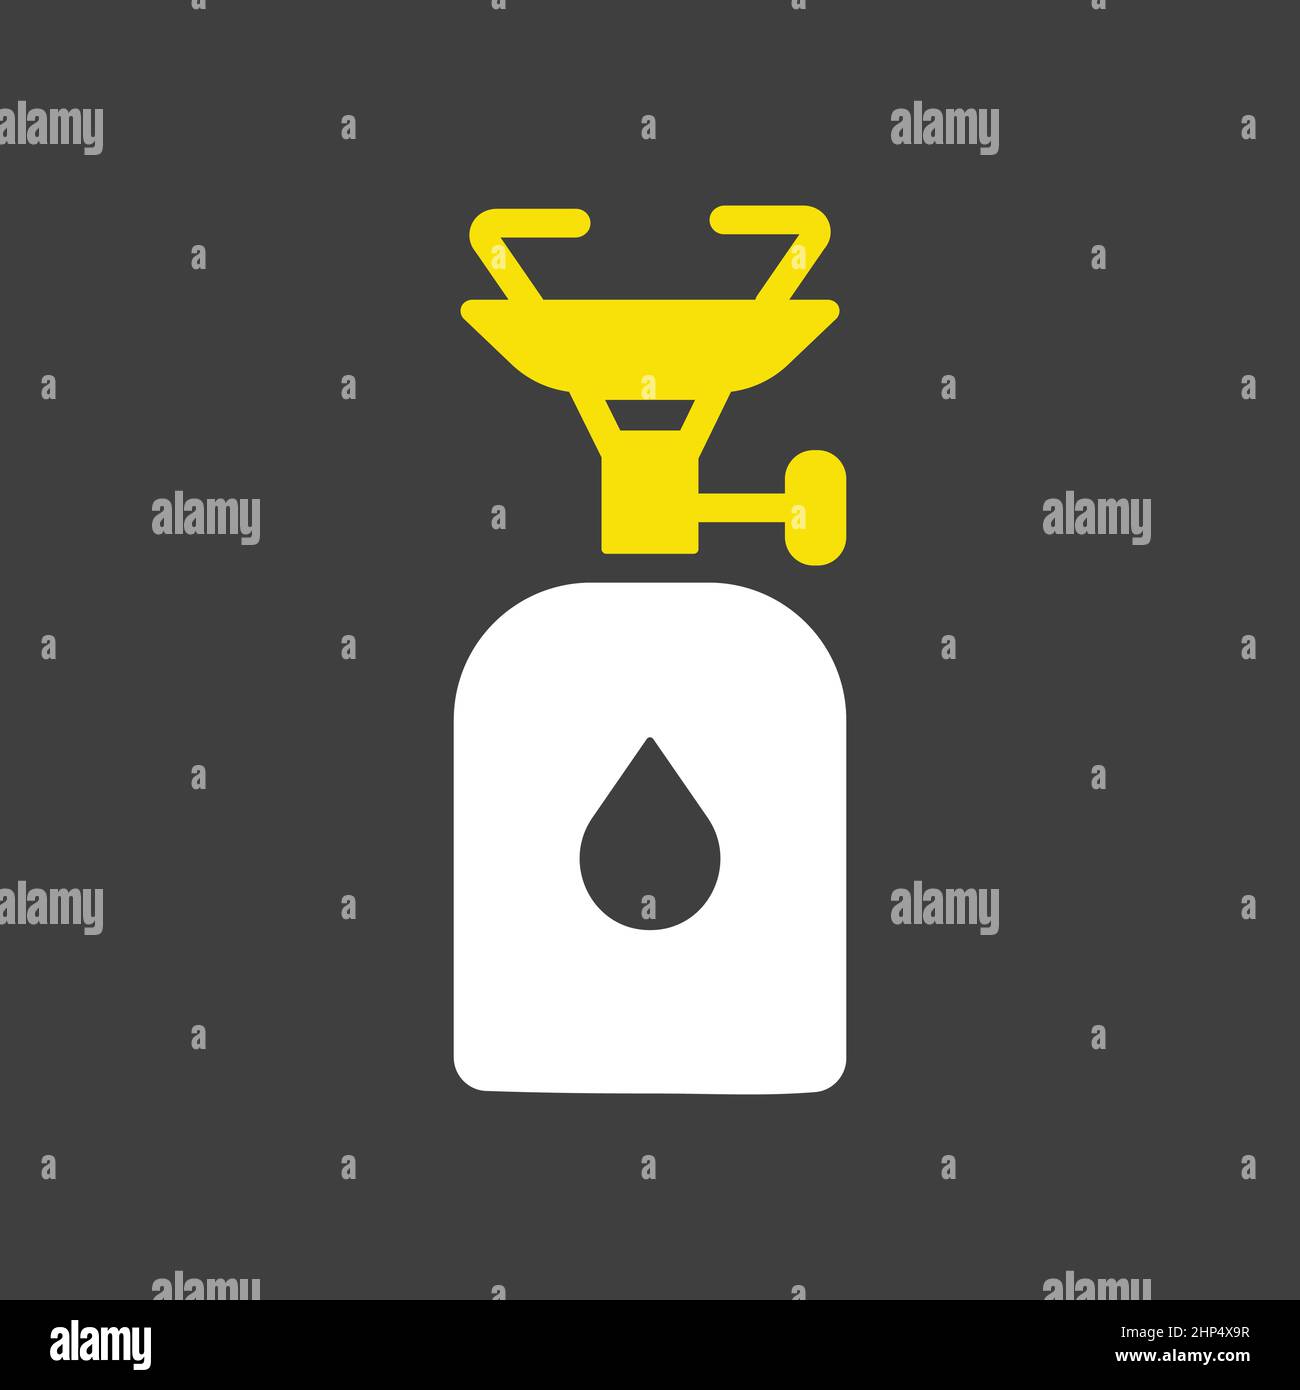 Camping gas stove vector icon on dark background. Camping sign Stock Vector